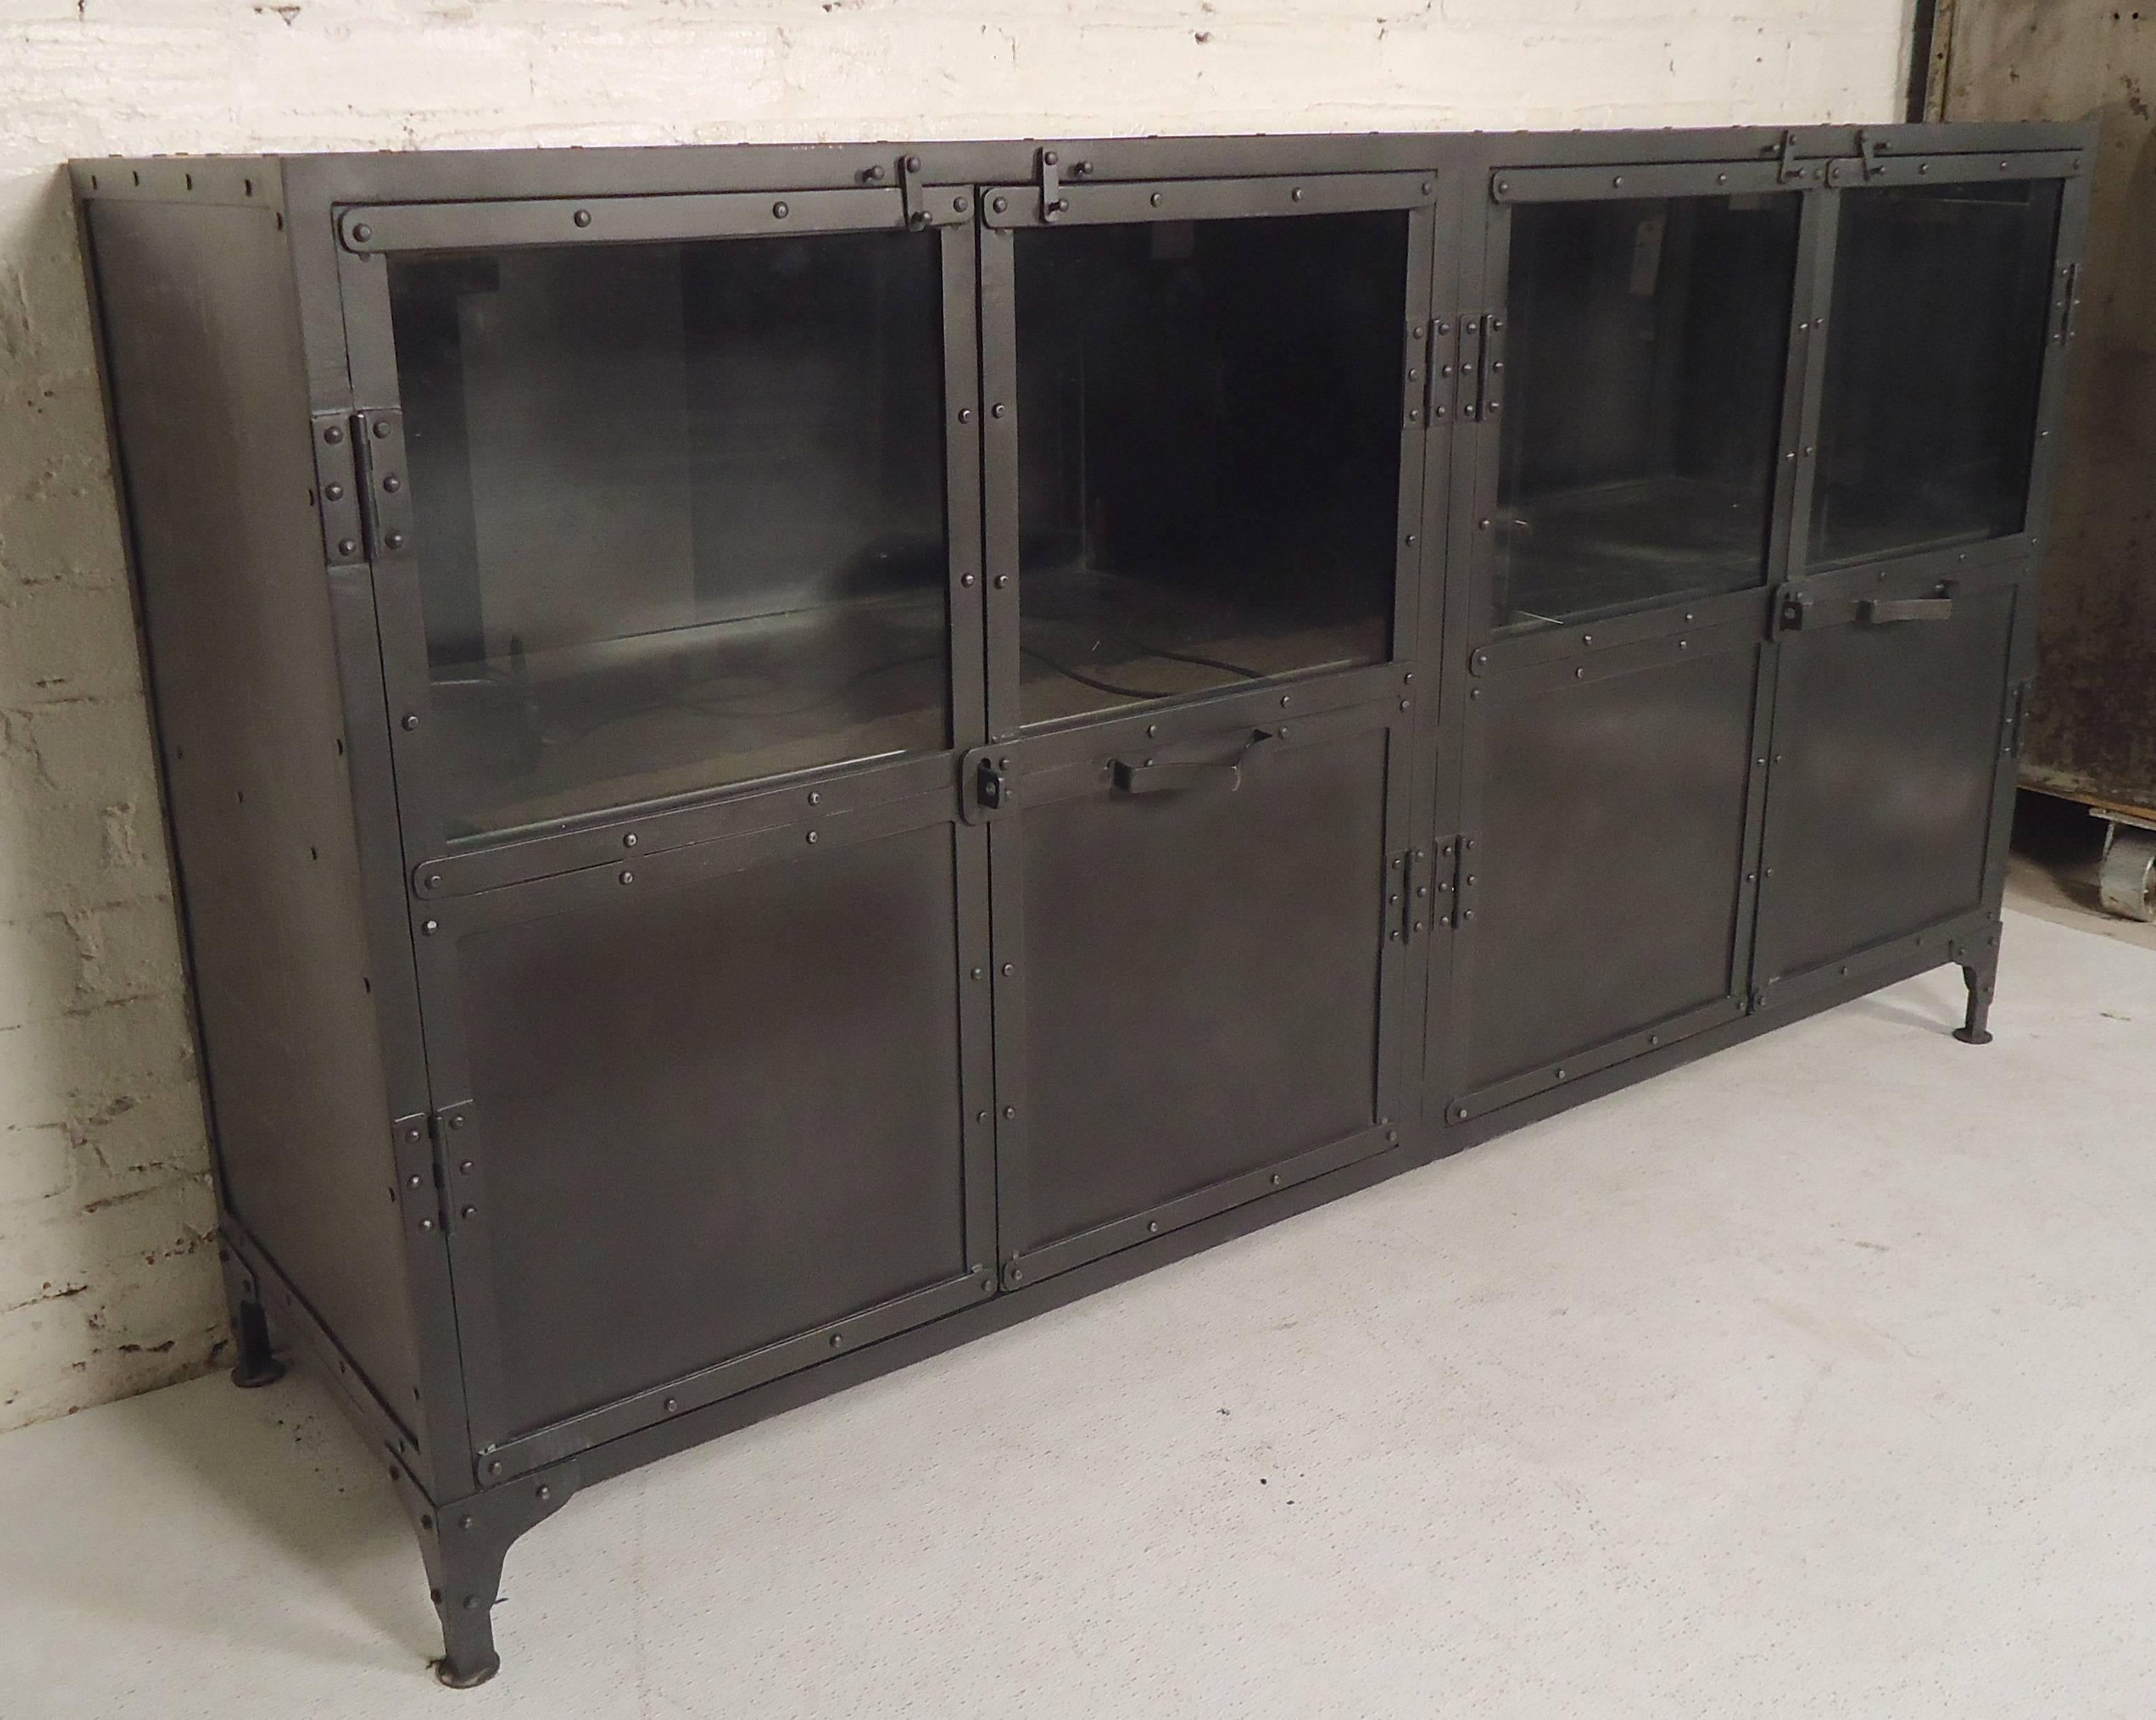 Heavy duty industrial style metal cabinet with glass top doors. Features handsome exposed rivets and metal latches for doors.

(Please confirm item location - NY or NJ - with dealer).
  